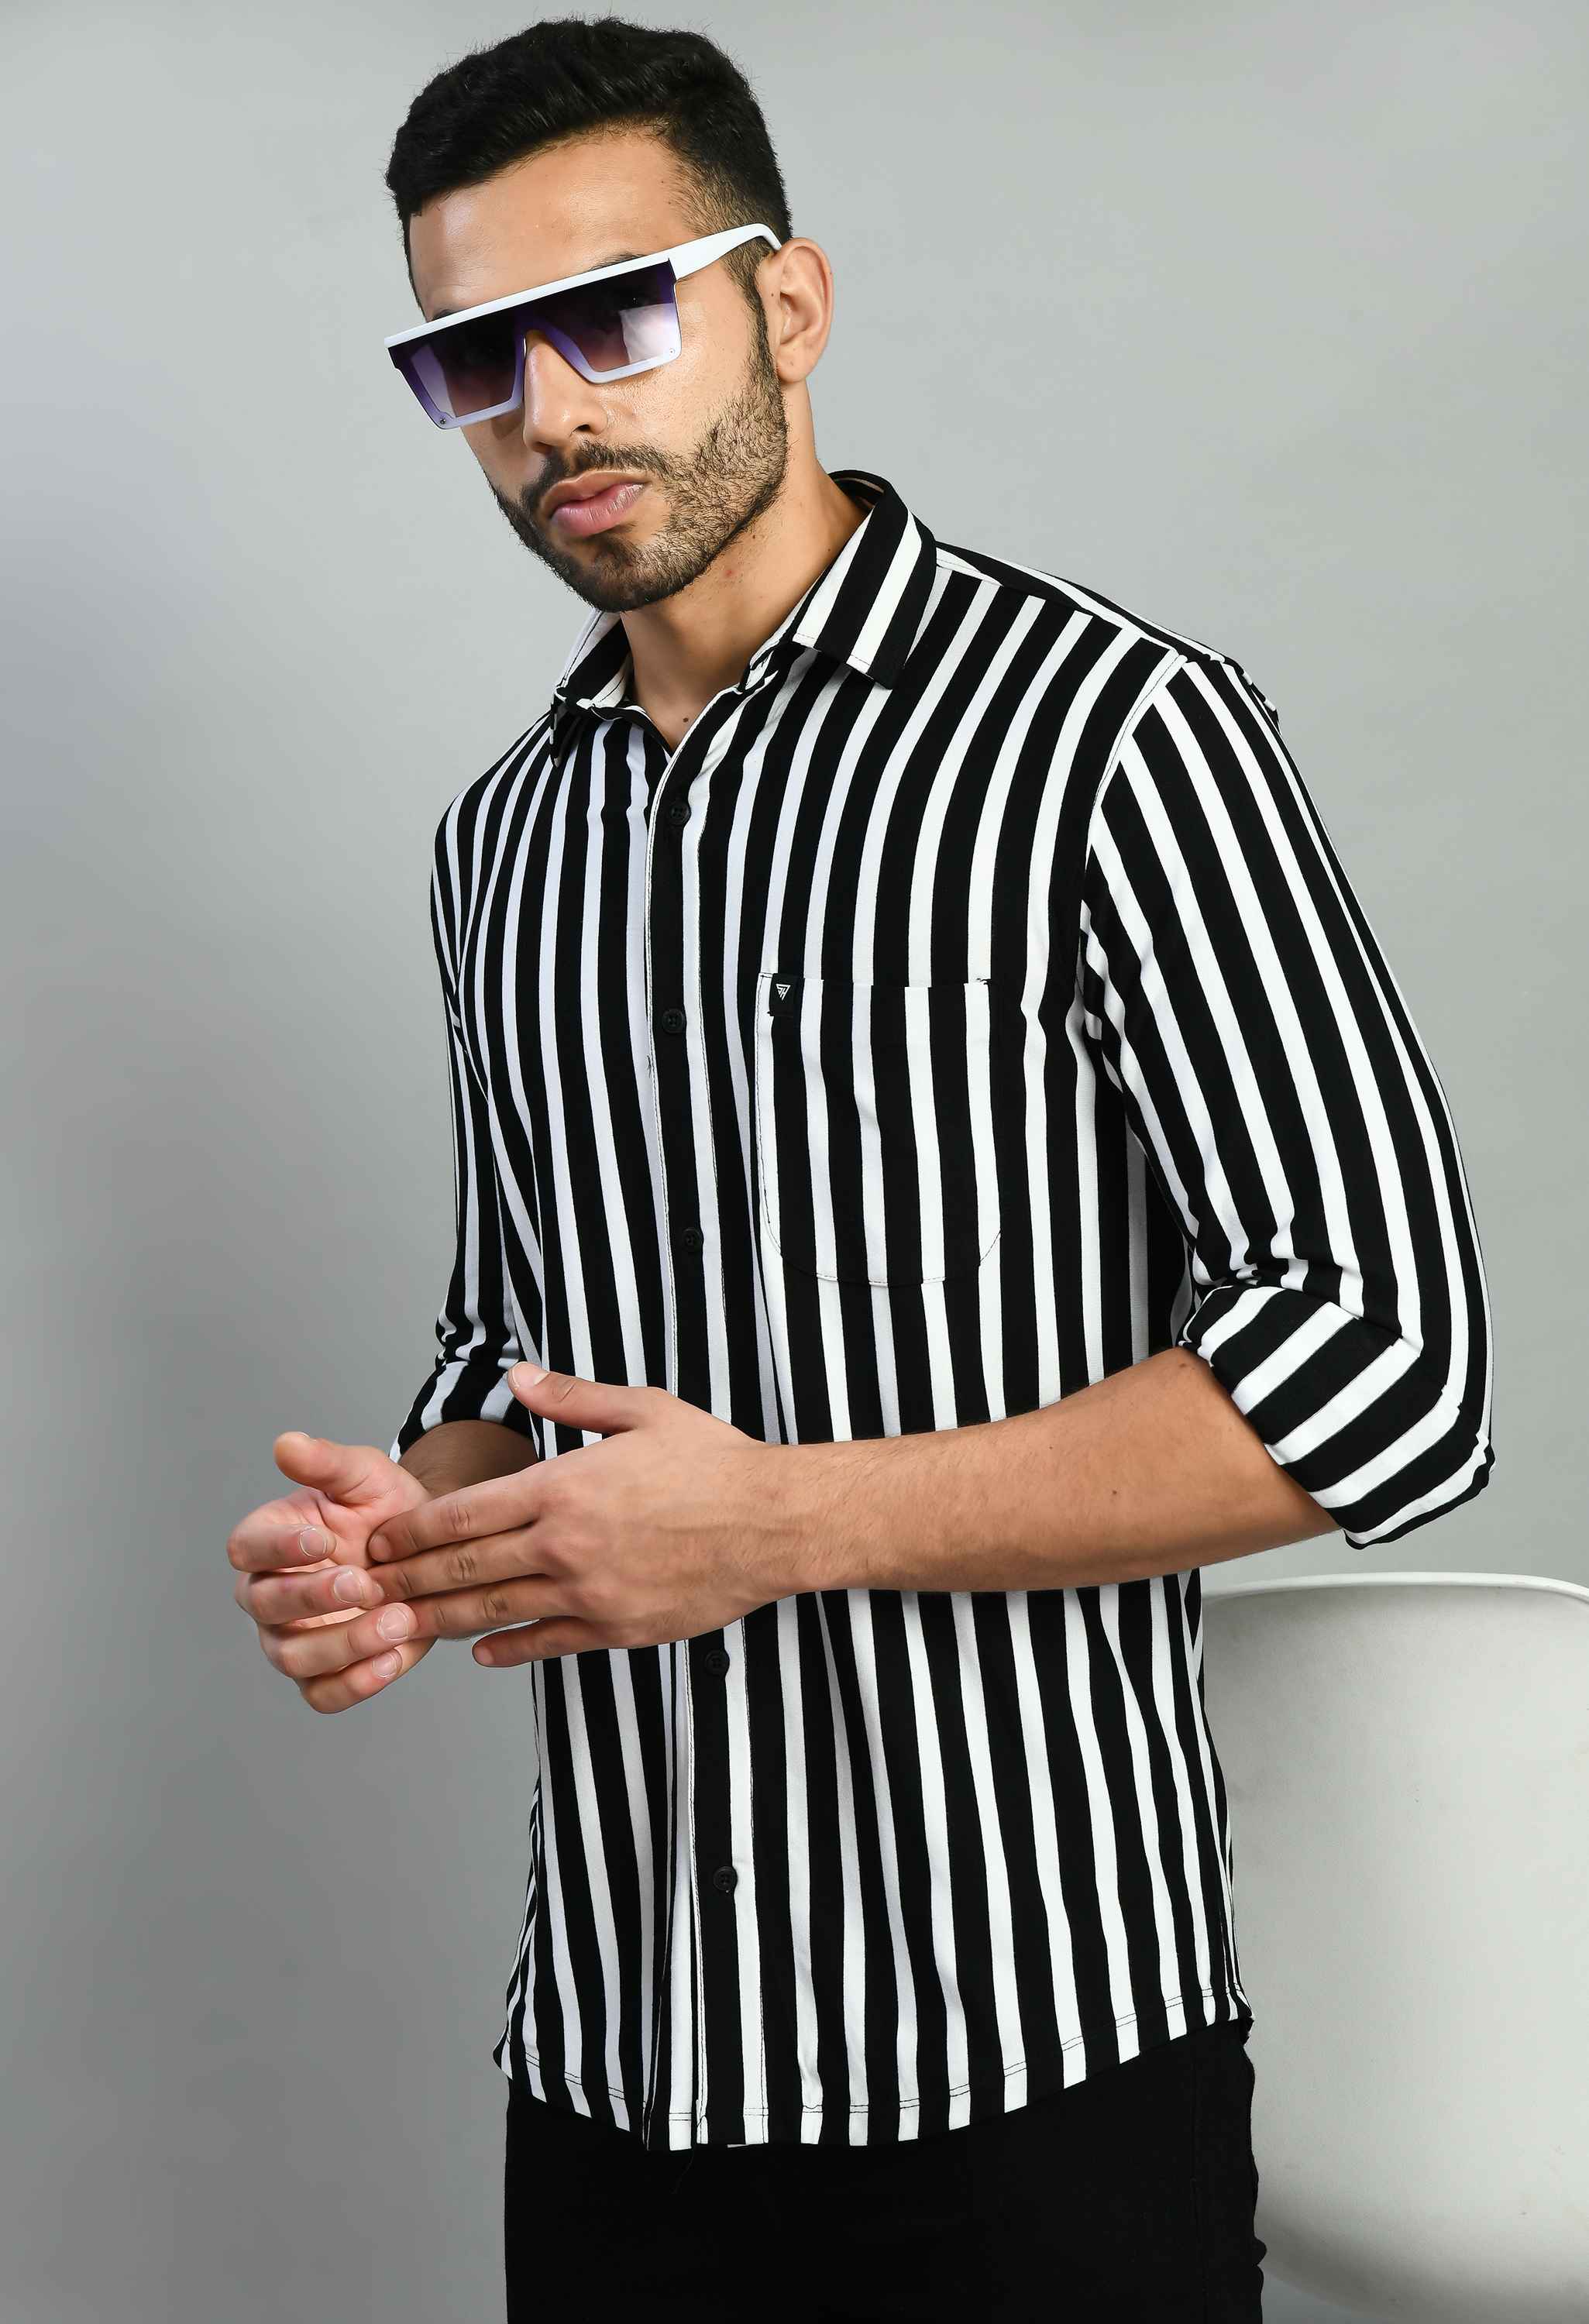 Black and White Casual Shirt for Men